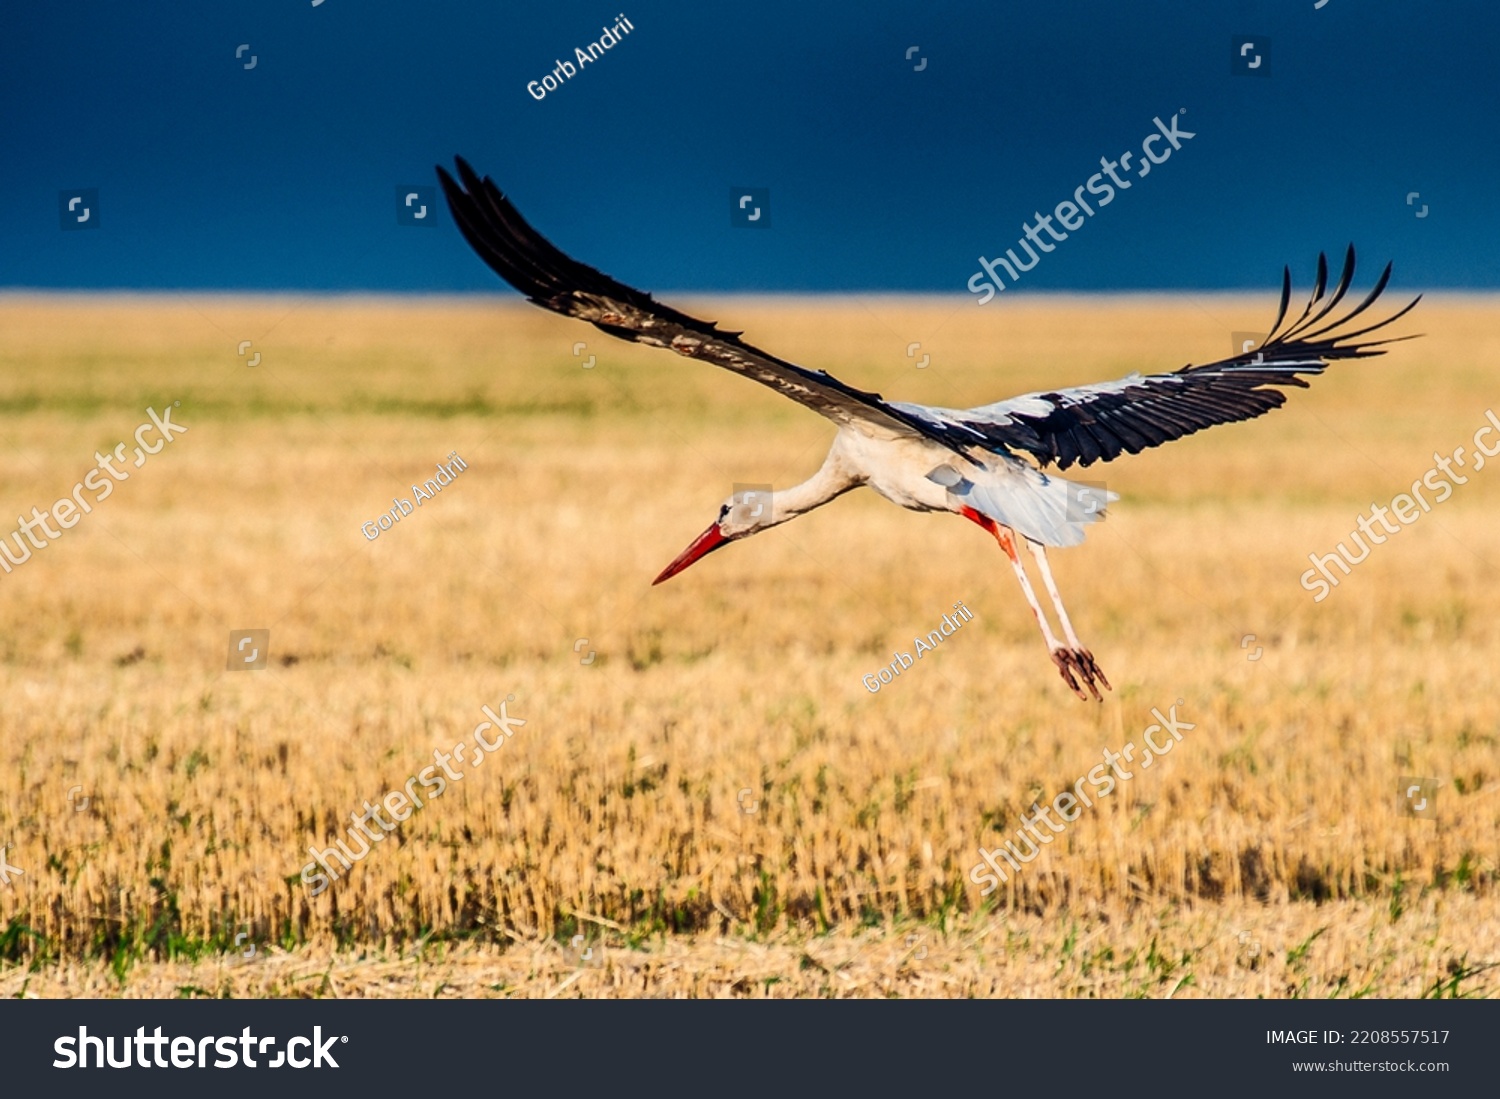 stork flying over the yellow field on the blue sky backgroun #2208557517